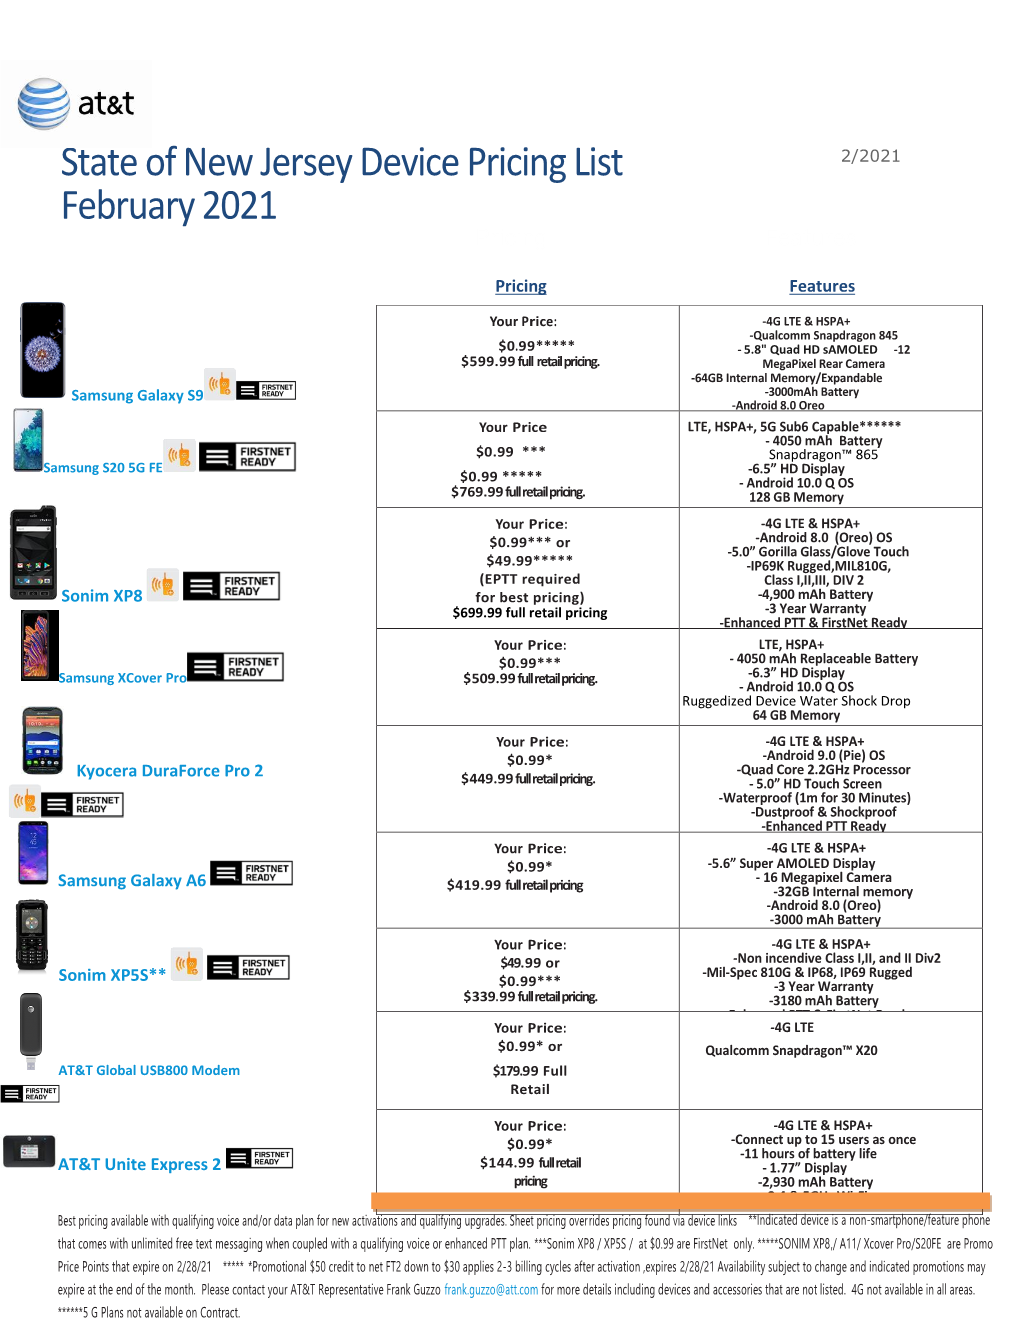 State of New Jersey Device Pricing List February 2021